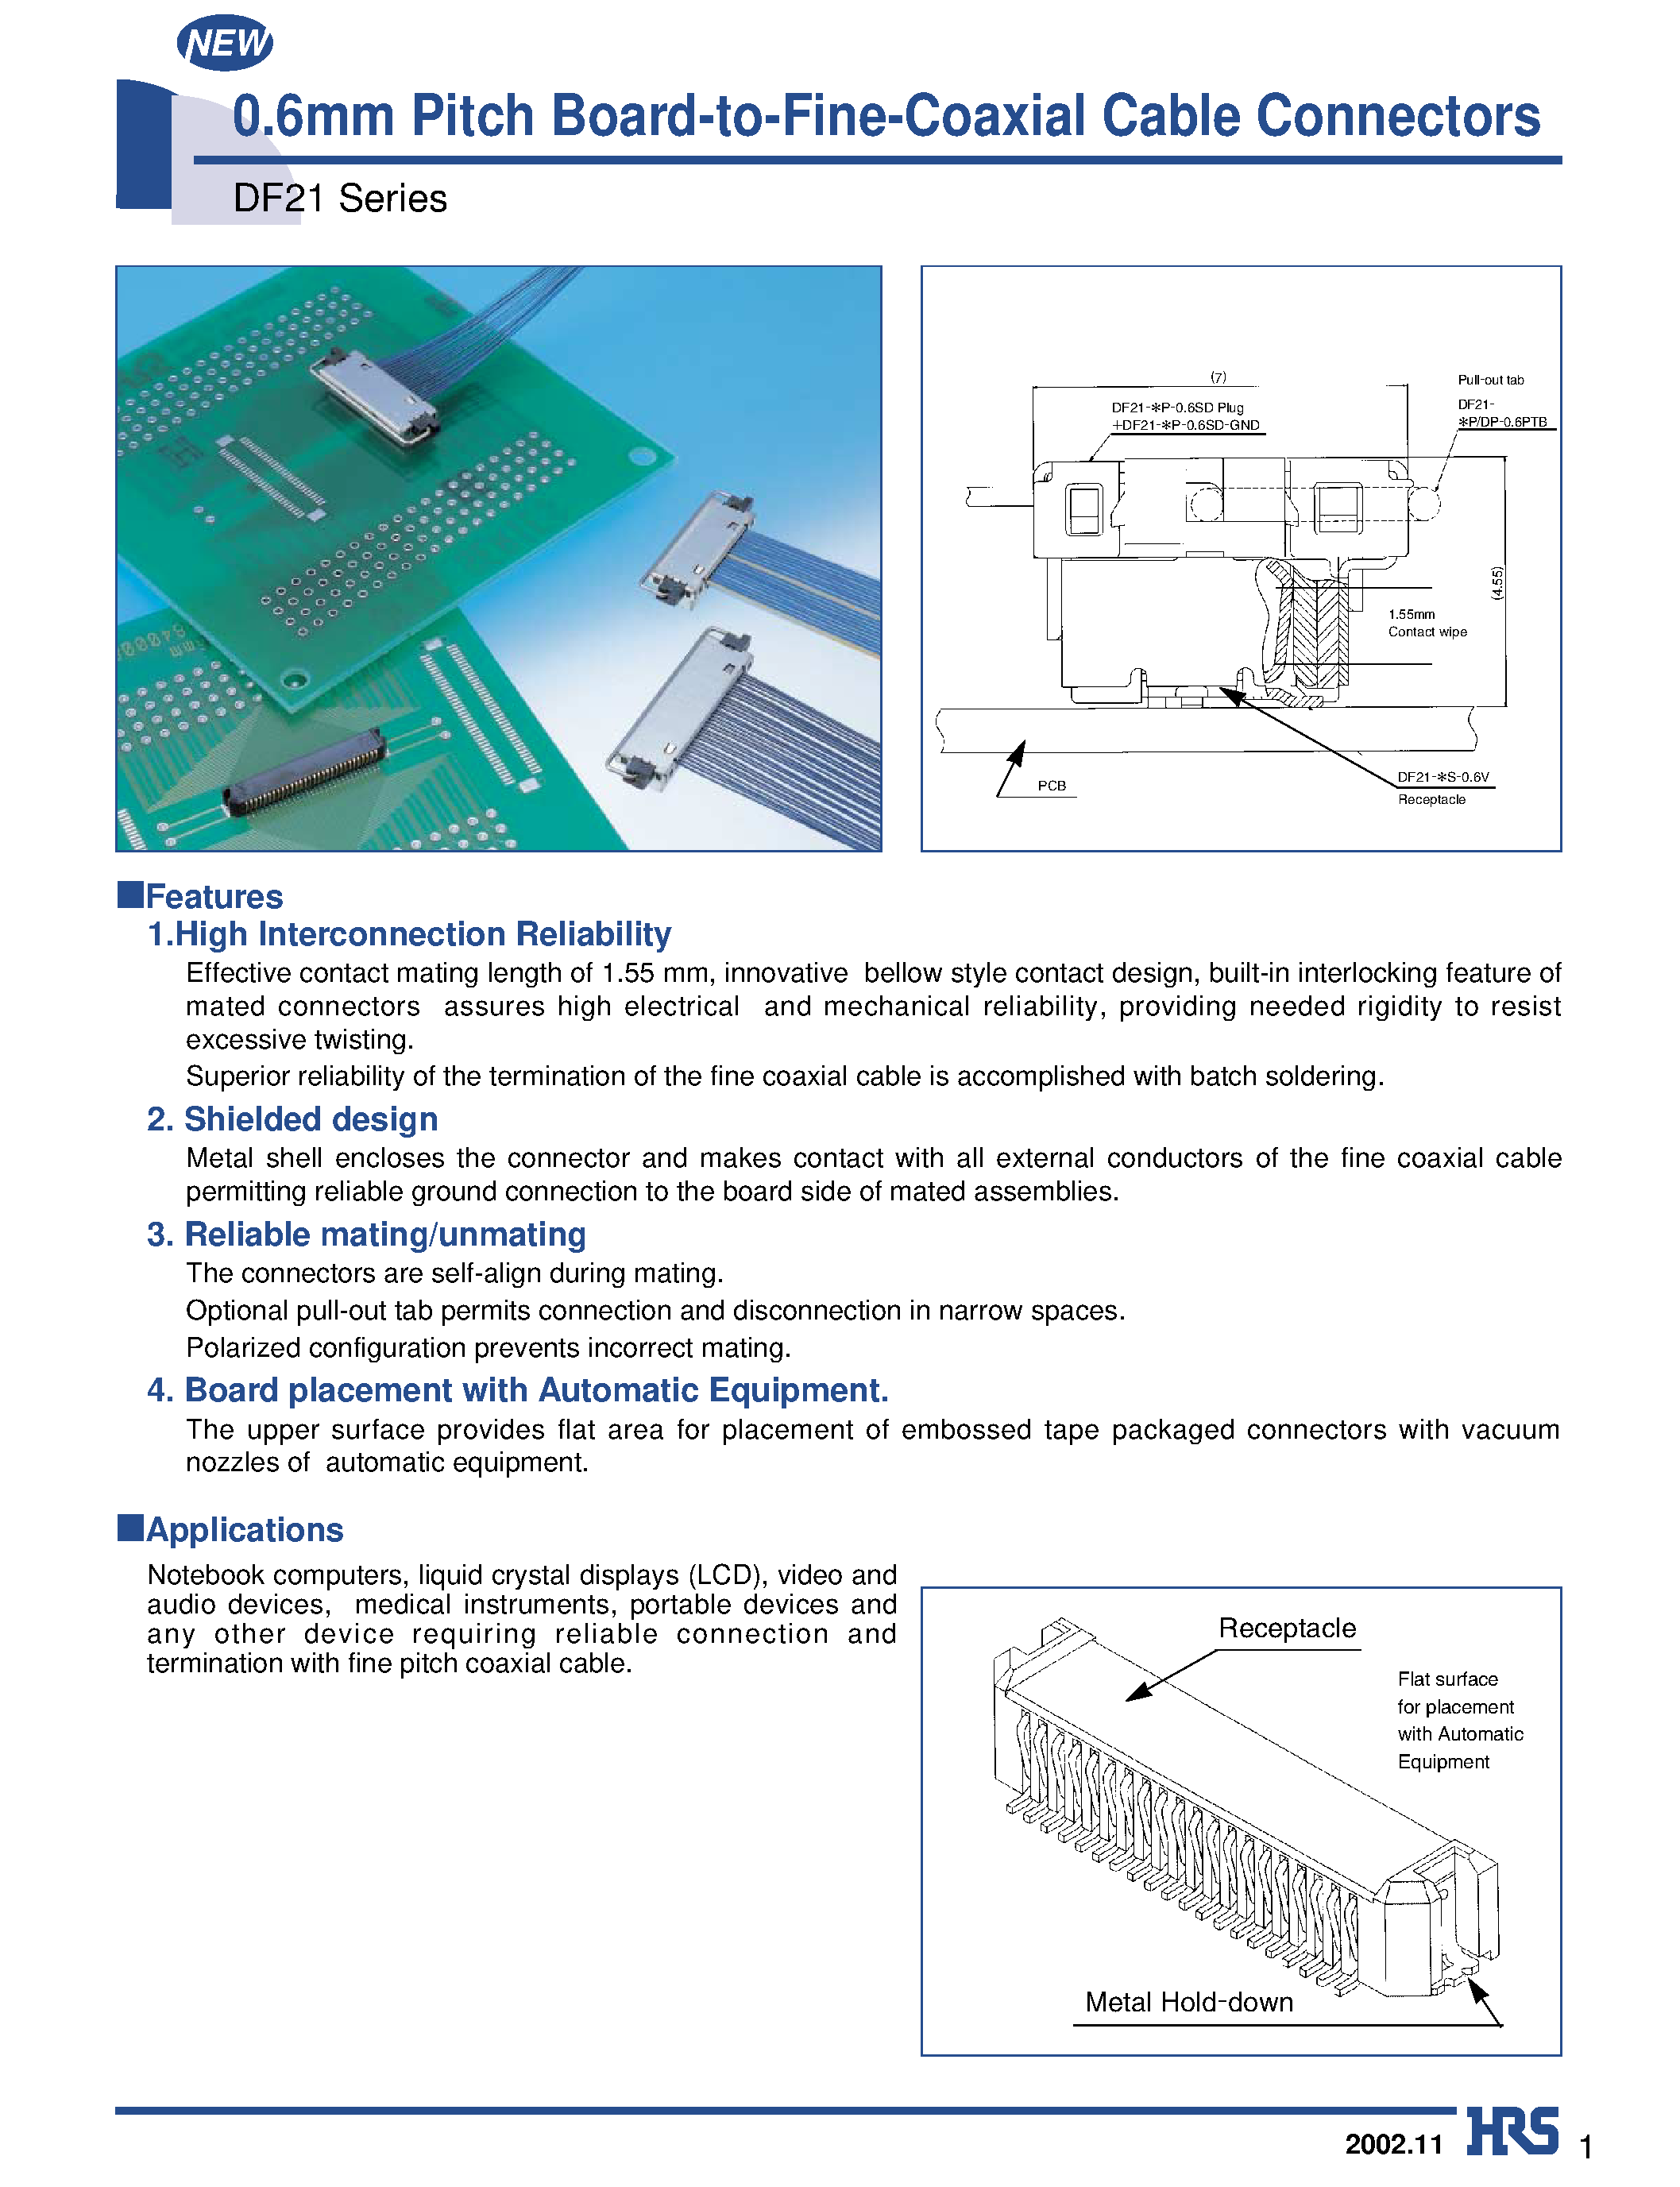 Datasheet DF21-40P-0.6PTB - 0.6mm Pitch Board-to-Fine-Coaxial Cable Connectors page 1